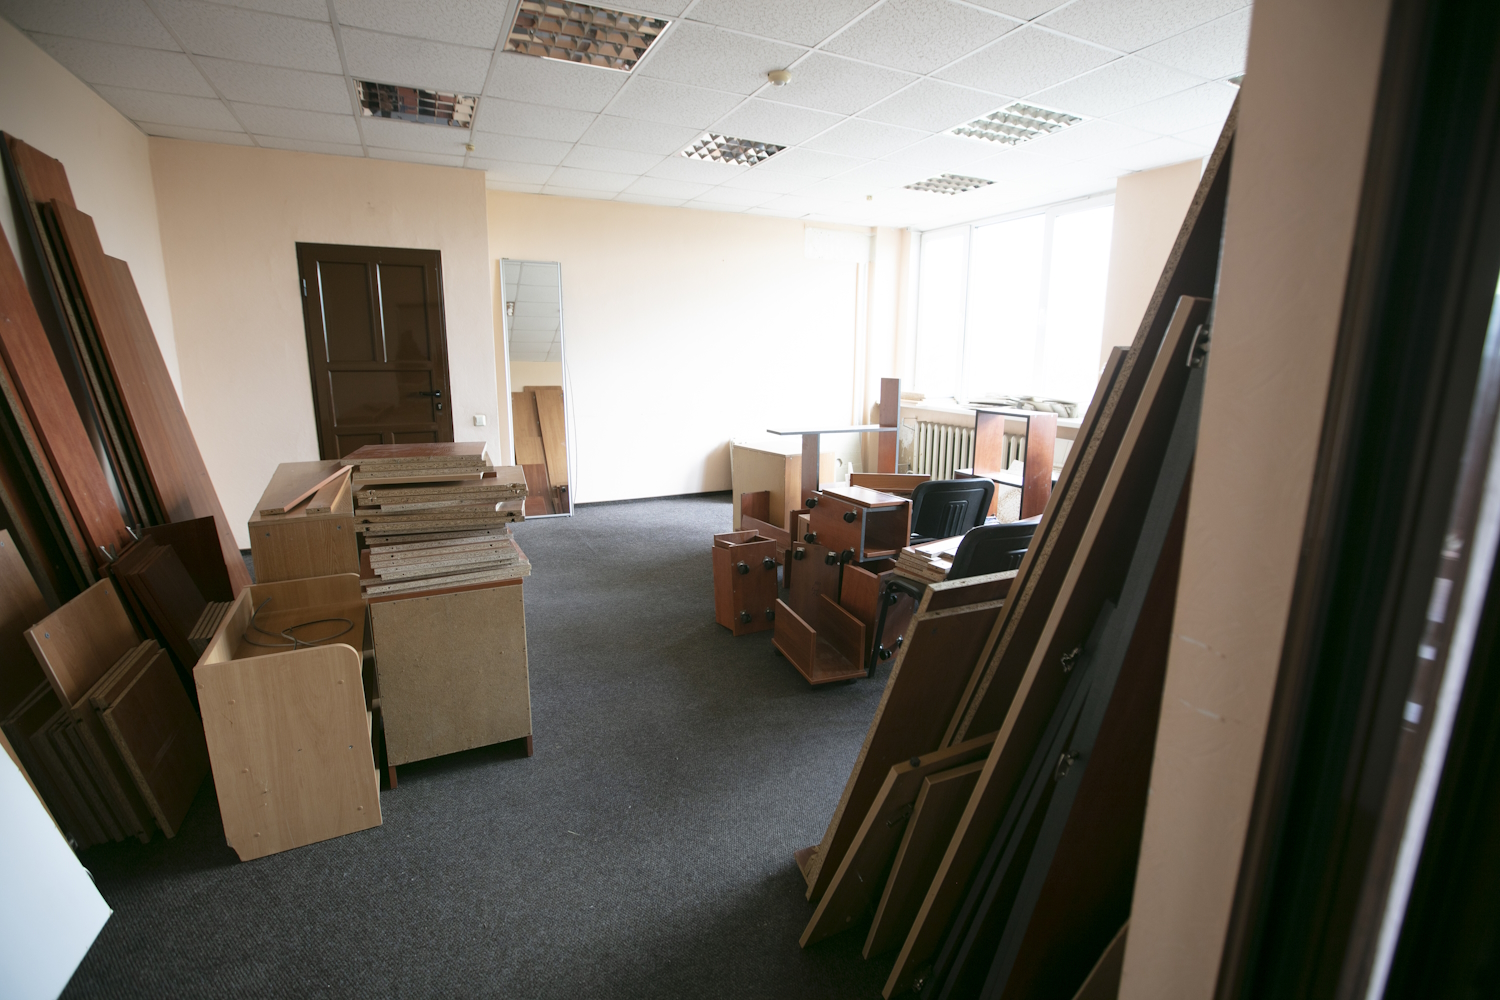 scattered office furniture in an empty room.